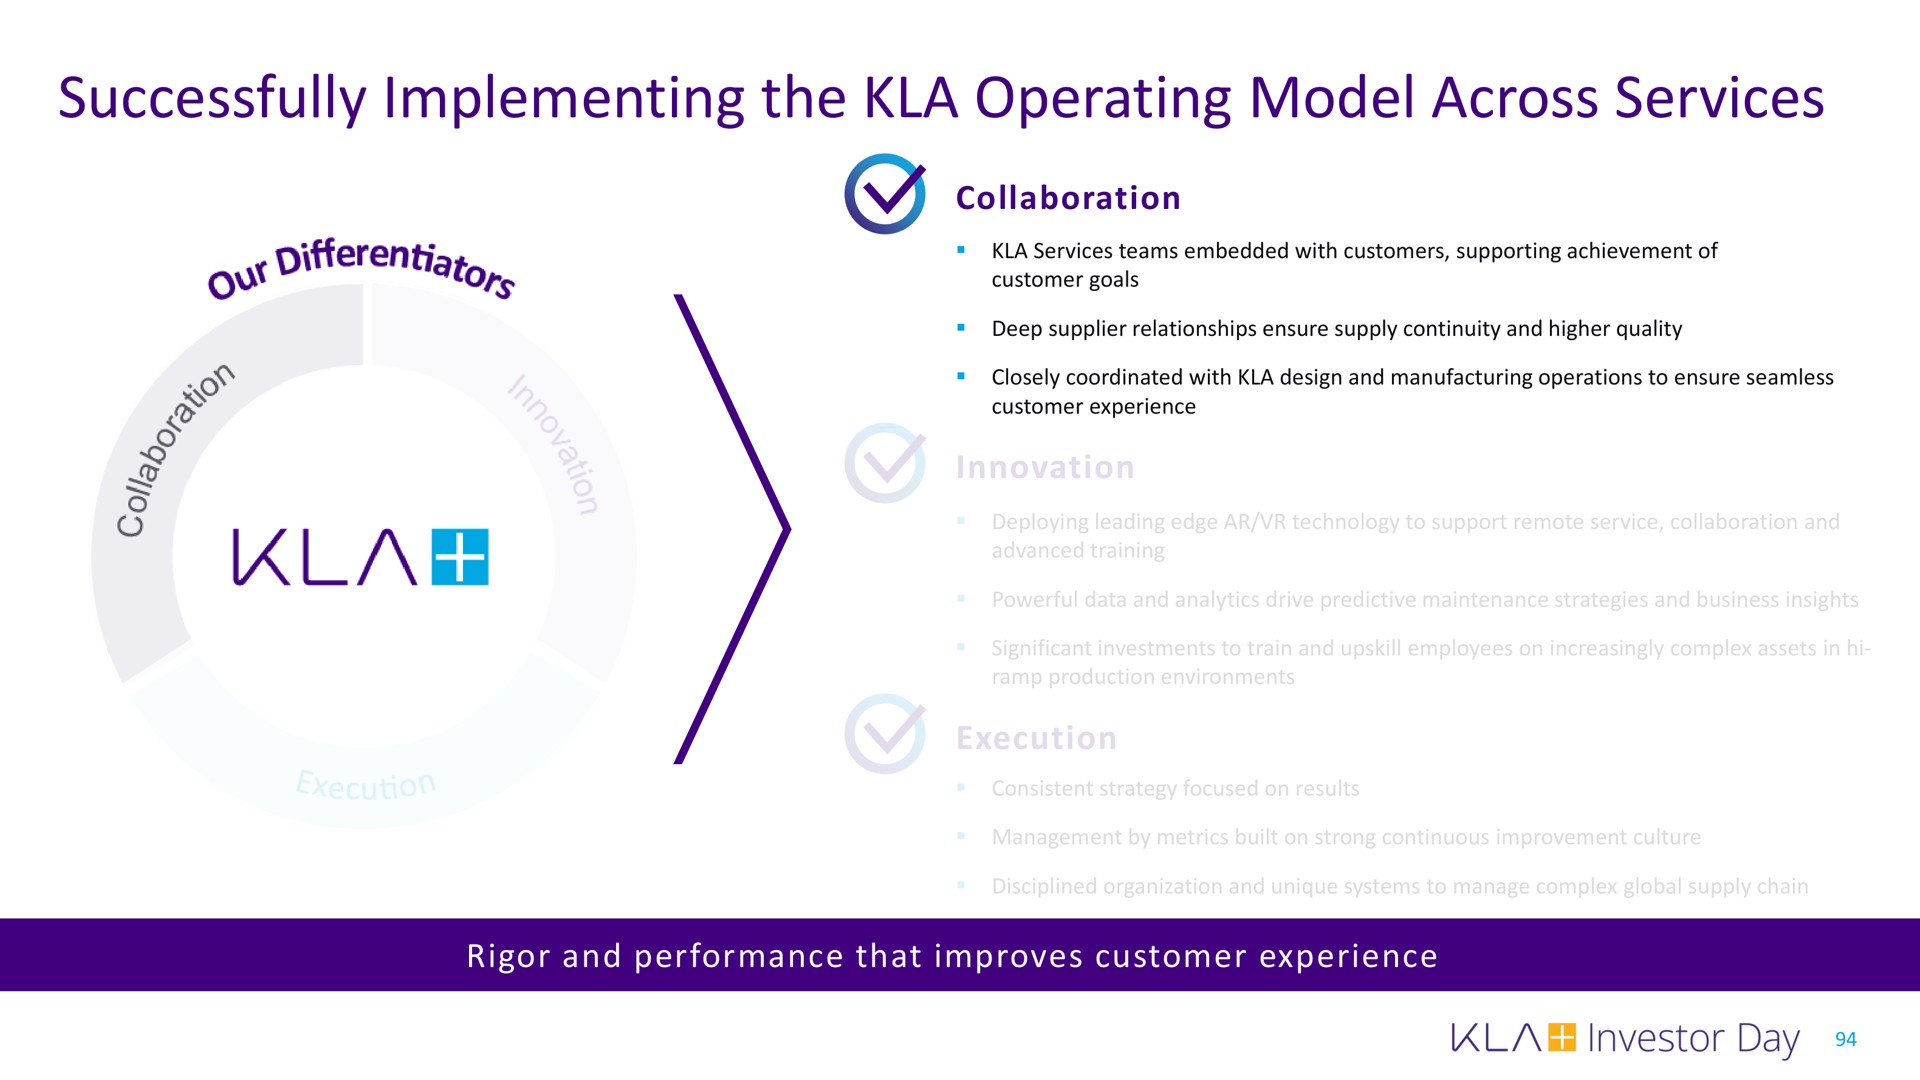 successfully implementing the operating model across services ala | KLA